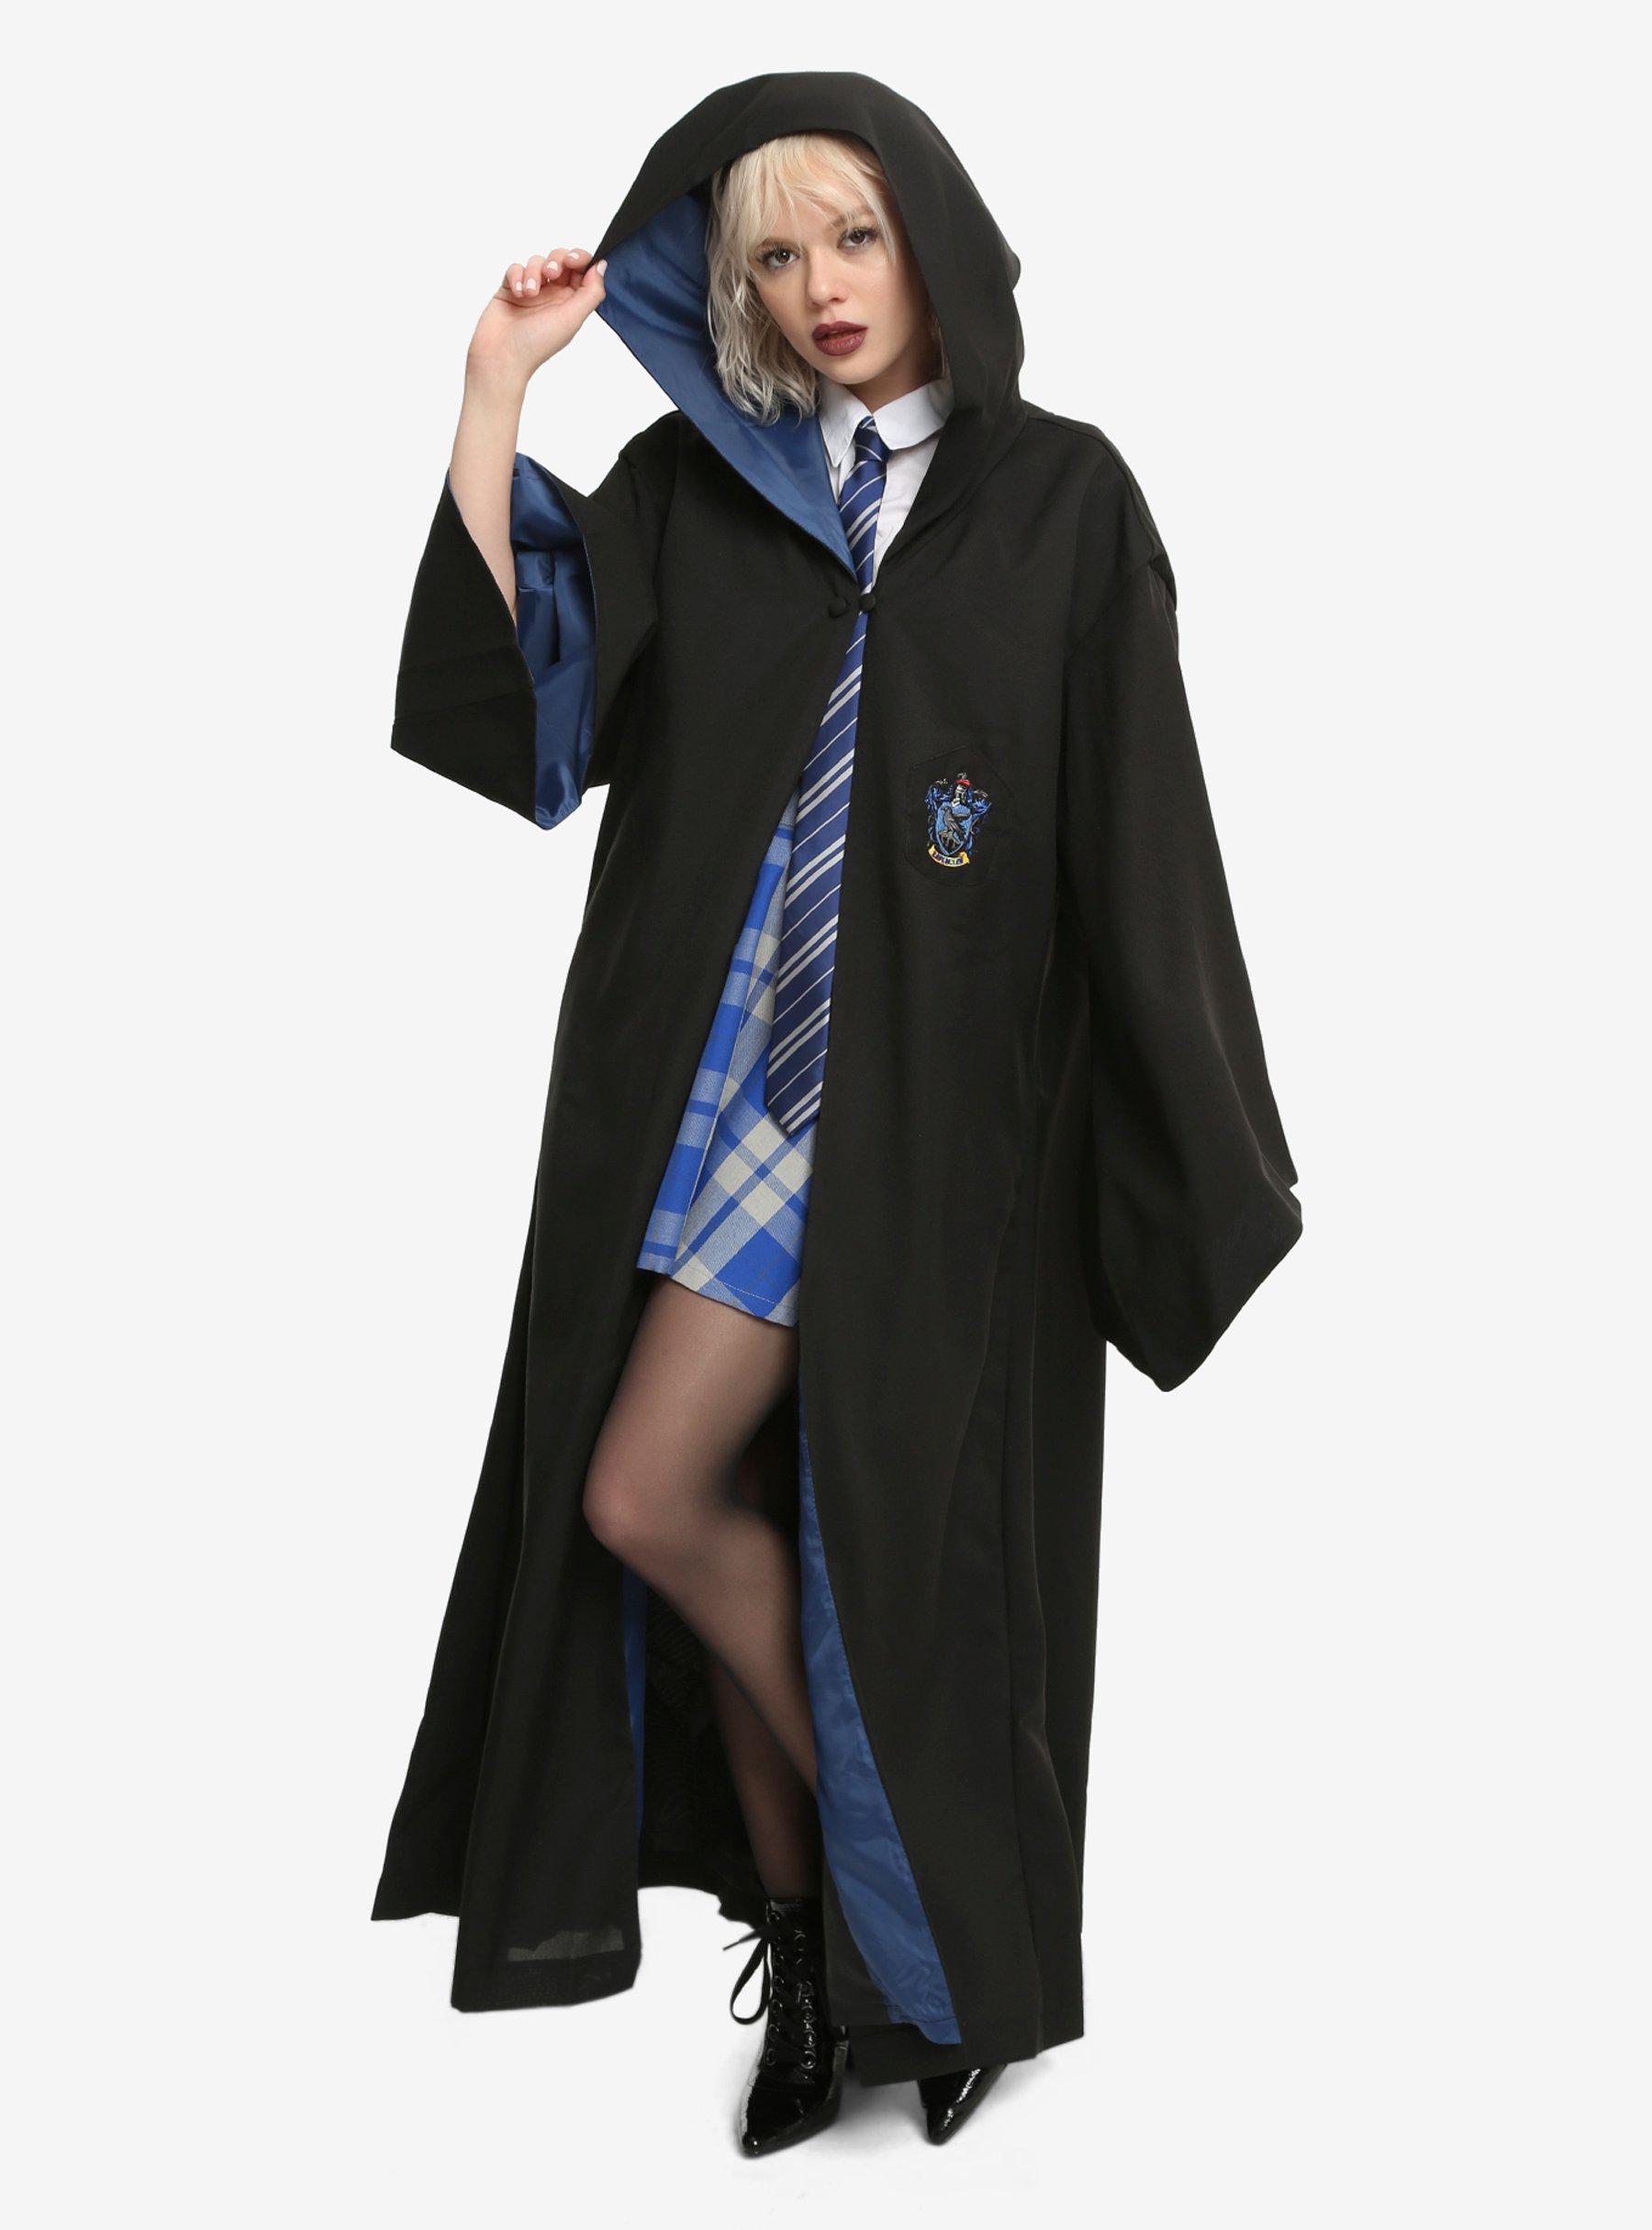 Harry Potter Adult Ravenclaw Robe 